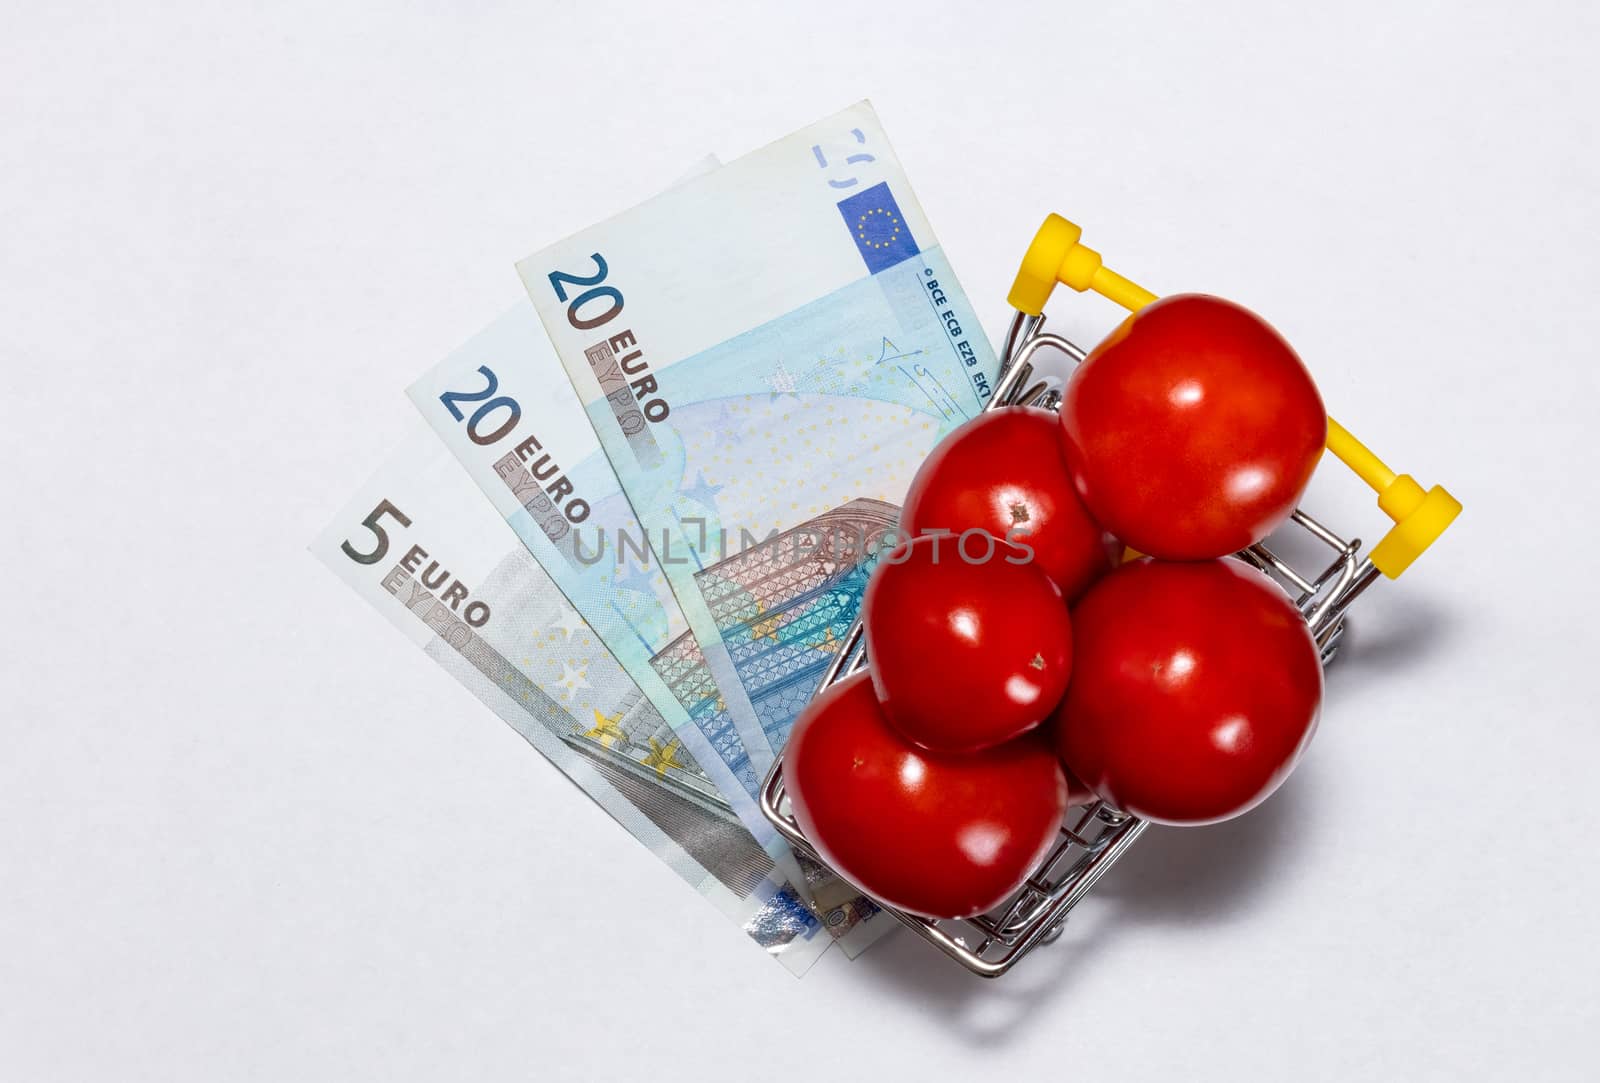 Shot of tomatoes in shopping cart isolated on white background with euro bills under it. Top view. Ripe tasty red tomatos in shopping cart. Tomato trading concept. Online shopping concept.